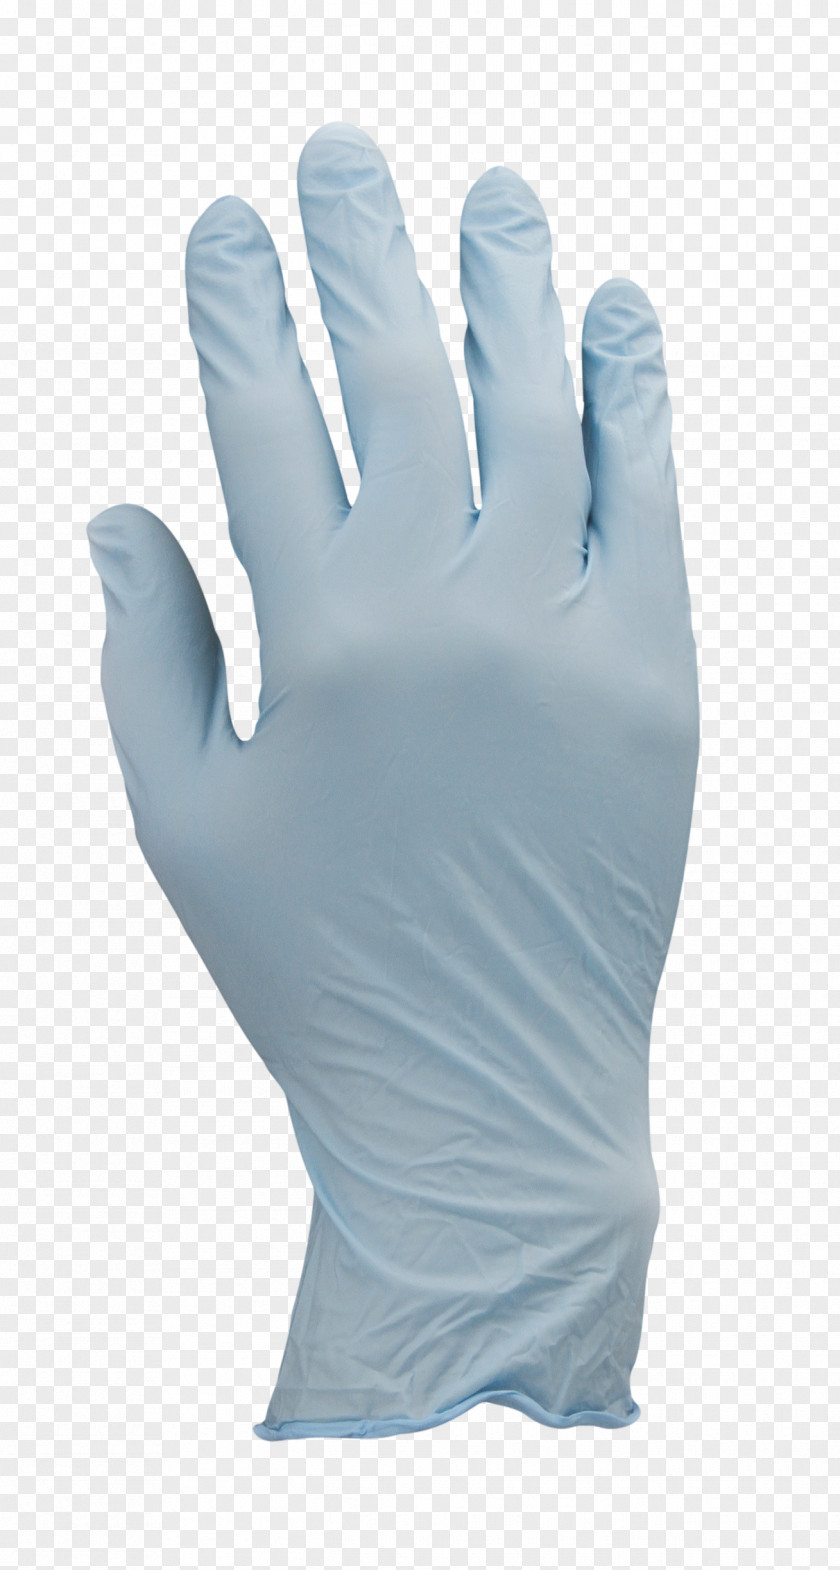 Small Fresh Material Plastic Medical Glove Nitrile Latex PNG